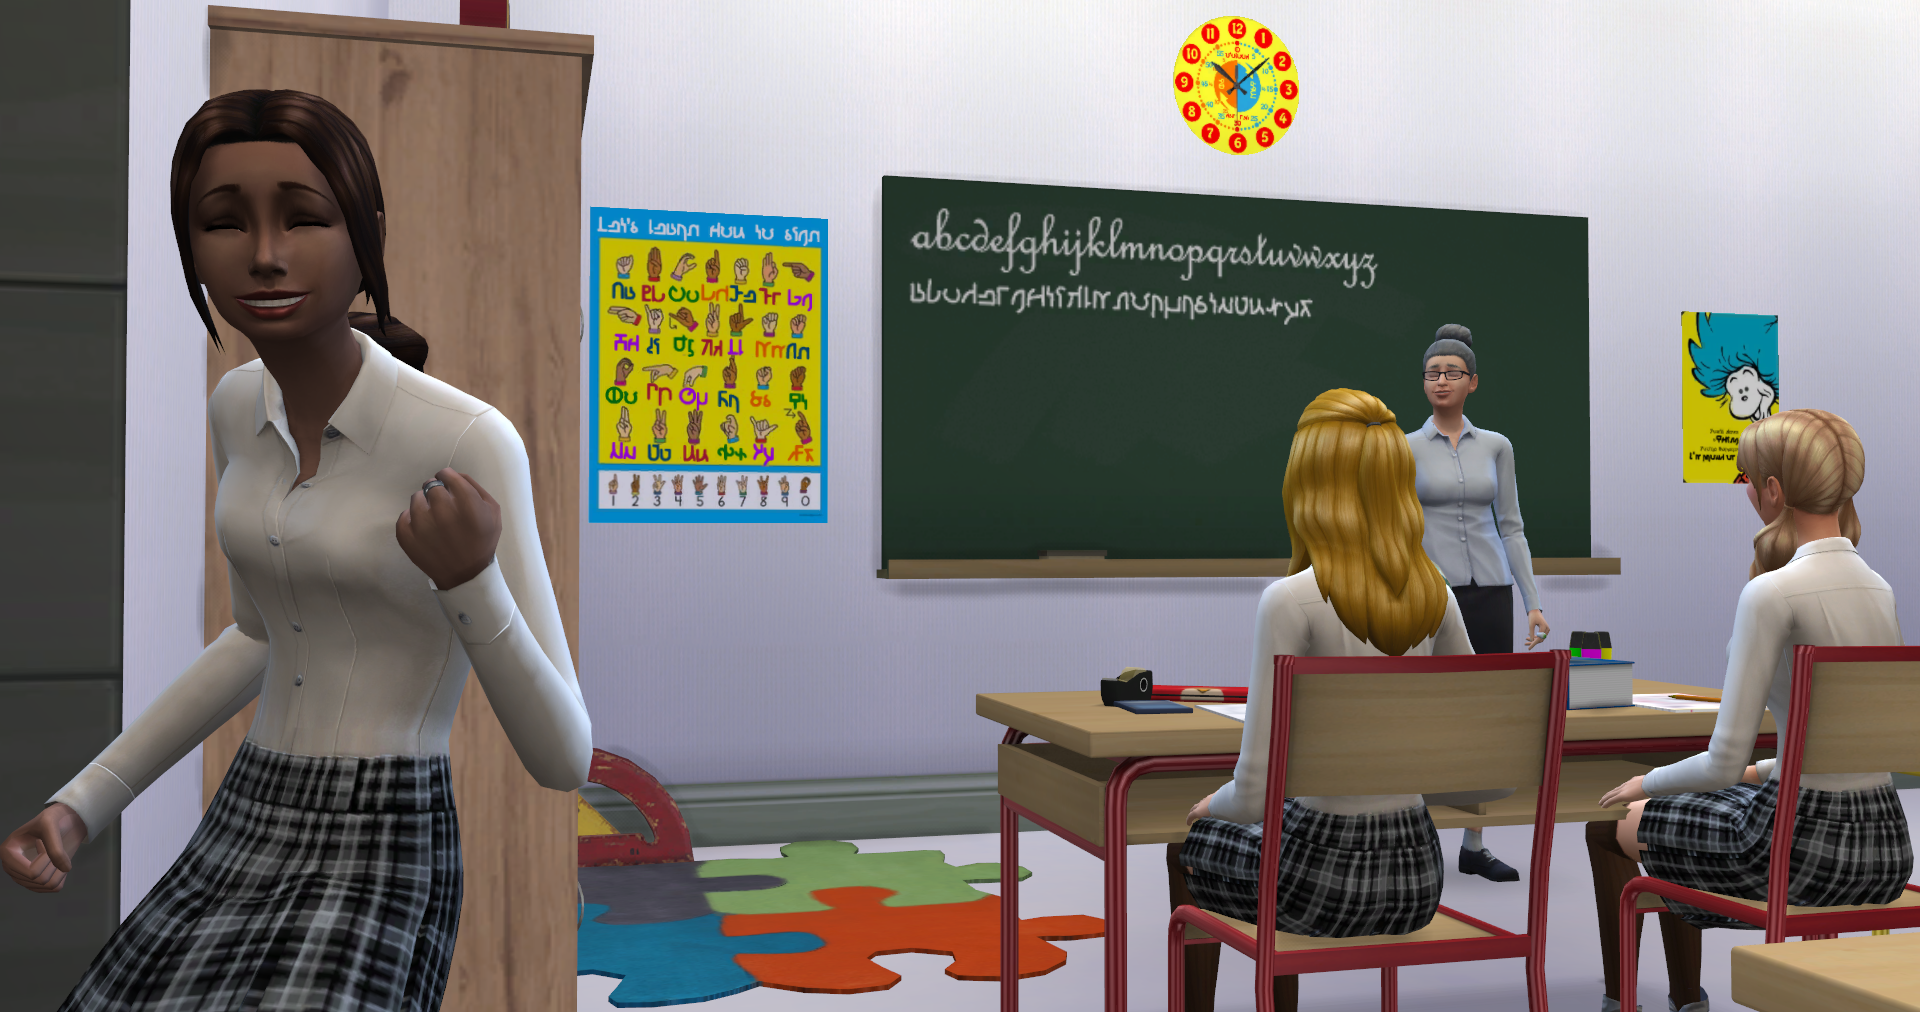 Sims 4 go to school mod pack